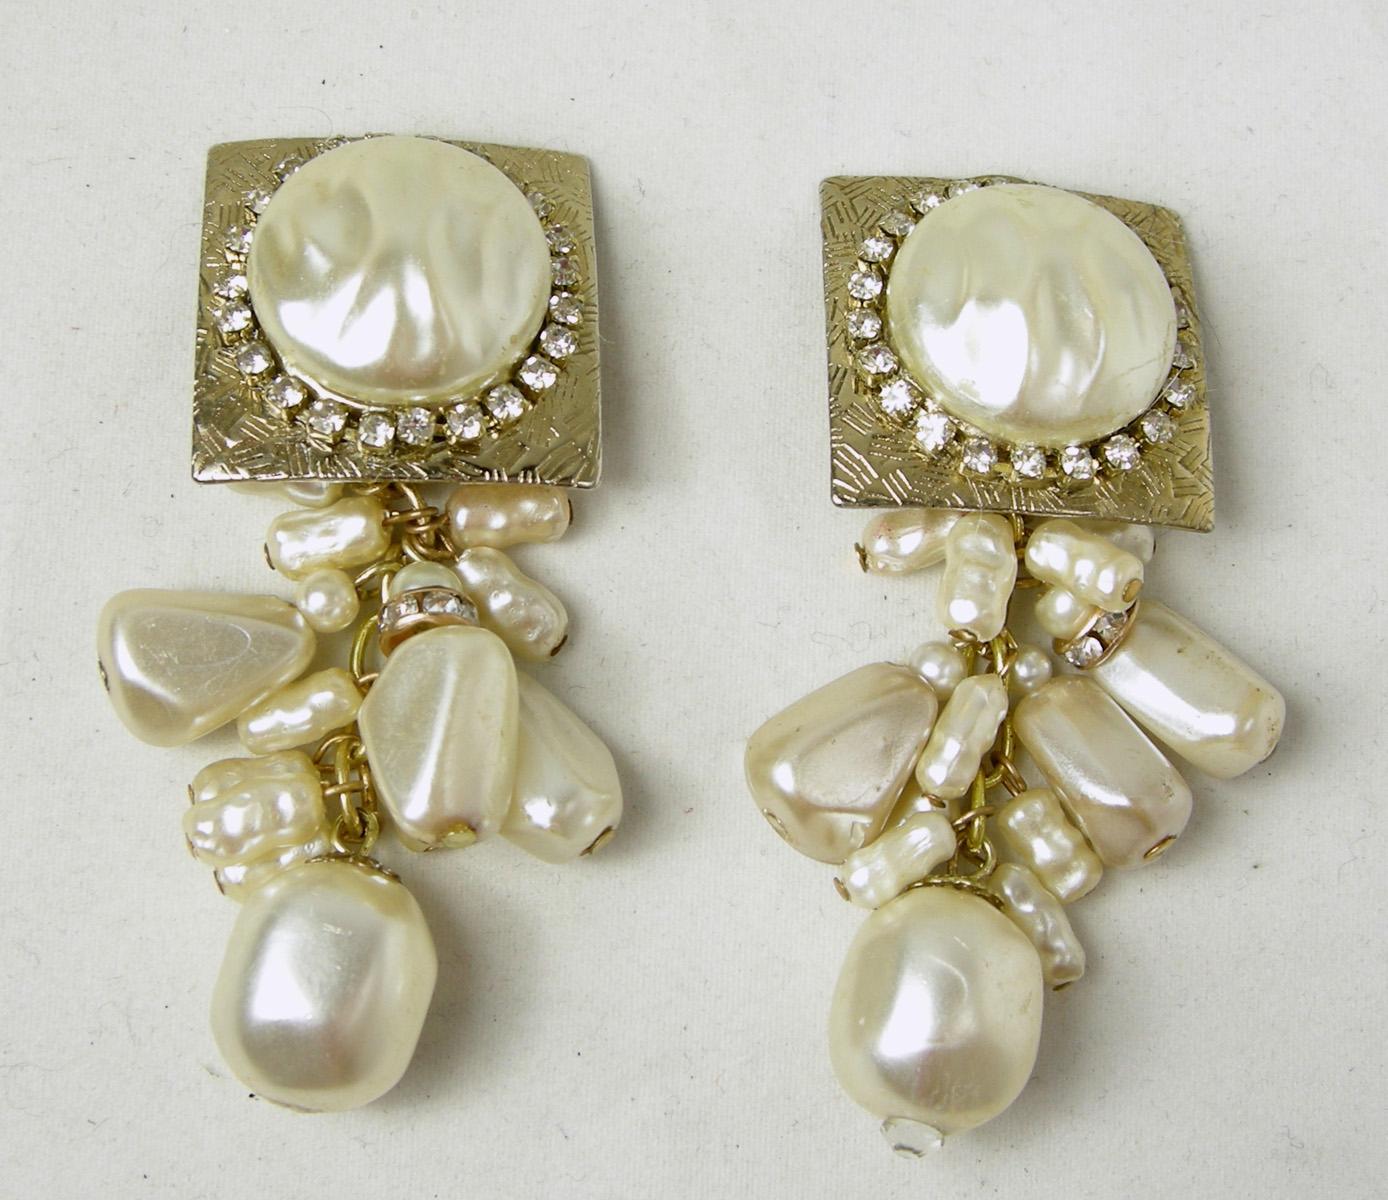 These vintage De Mario Clip earrings have a large faux pearl on top surrounded by rhinestones on a gold tone Florentine square.  Dangling below are different shaped faux pearls.  They measure 2-1/4” long x 1” wide.  They are signed “De Mario” and